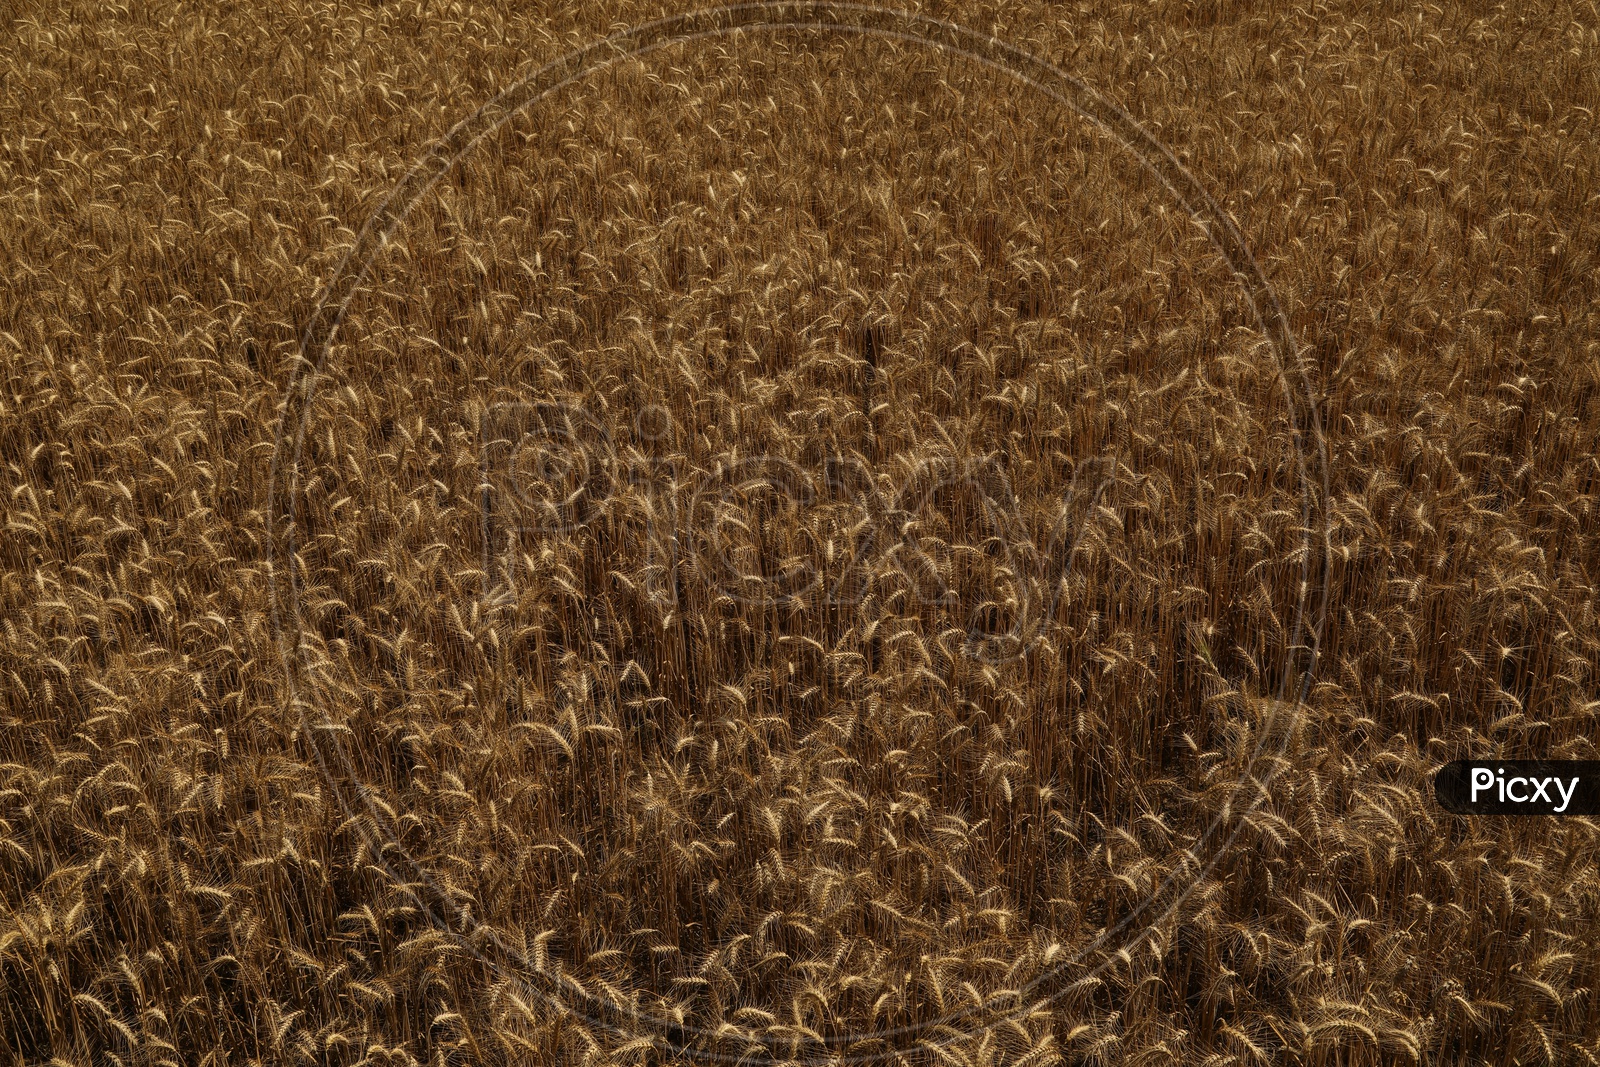 photograph of wheat agriculture field